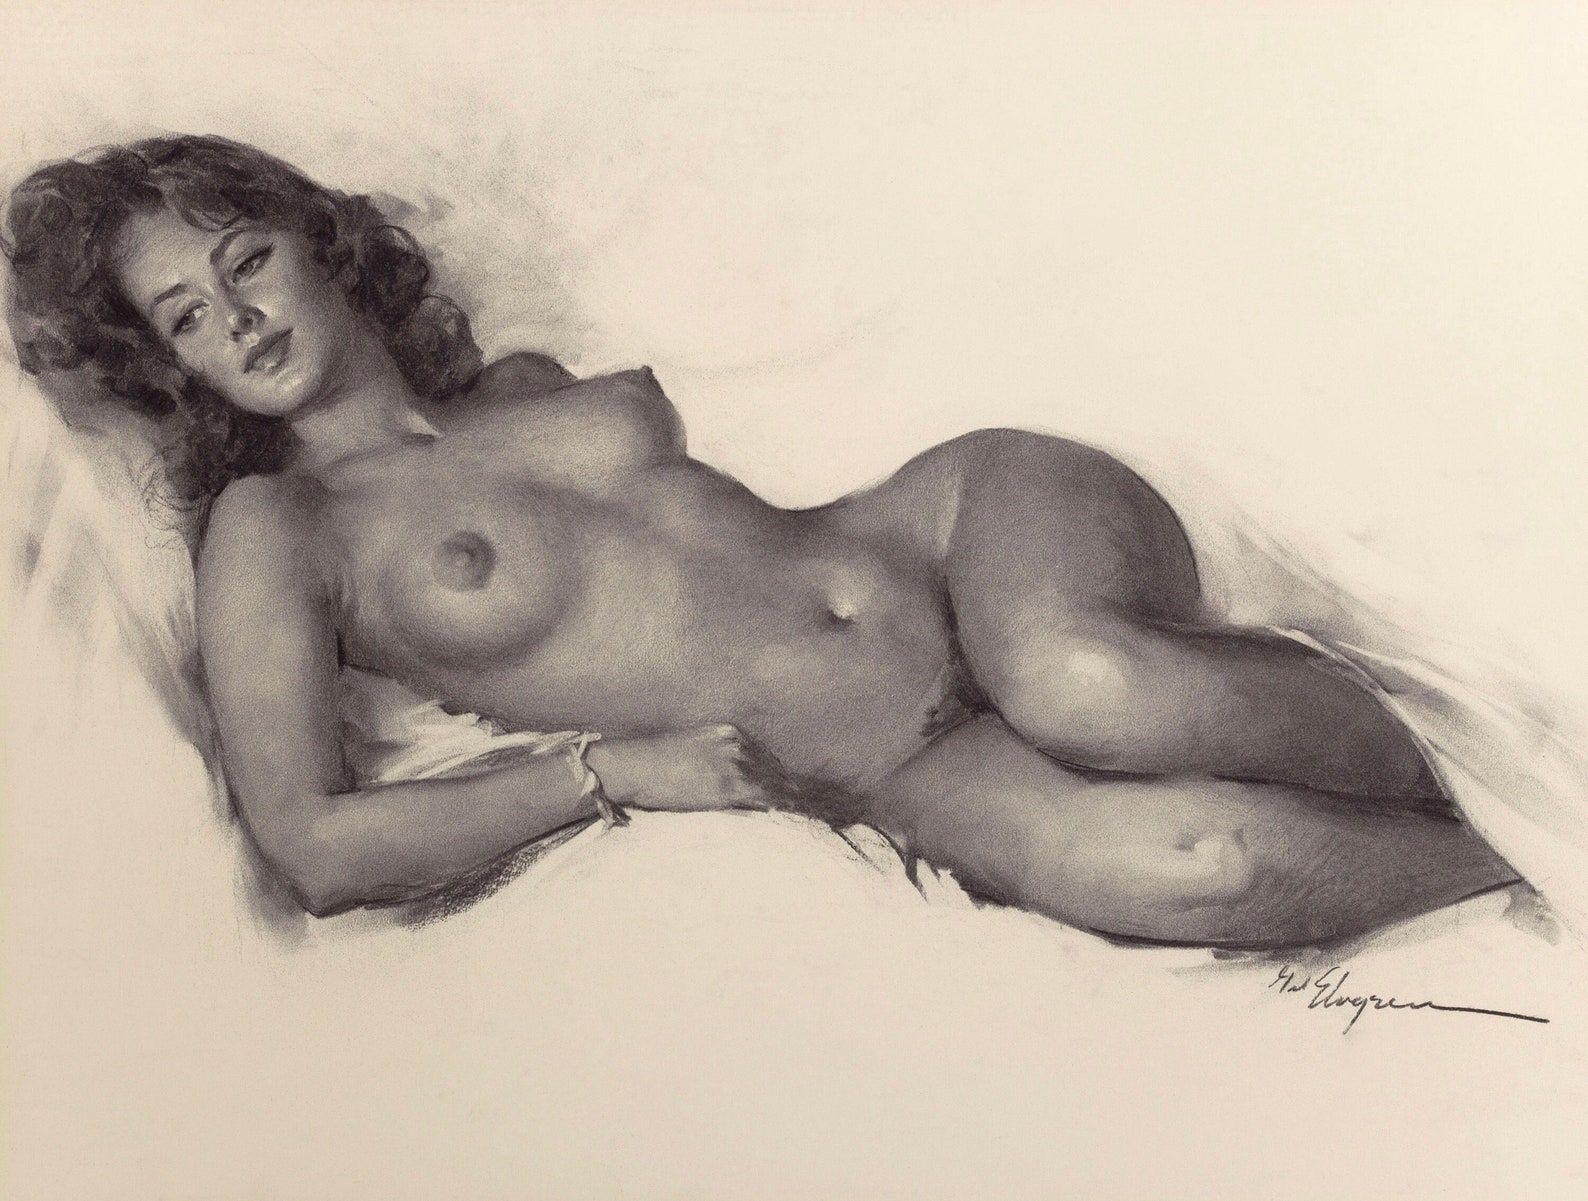 Nude and erotic art